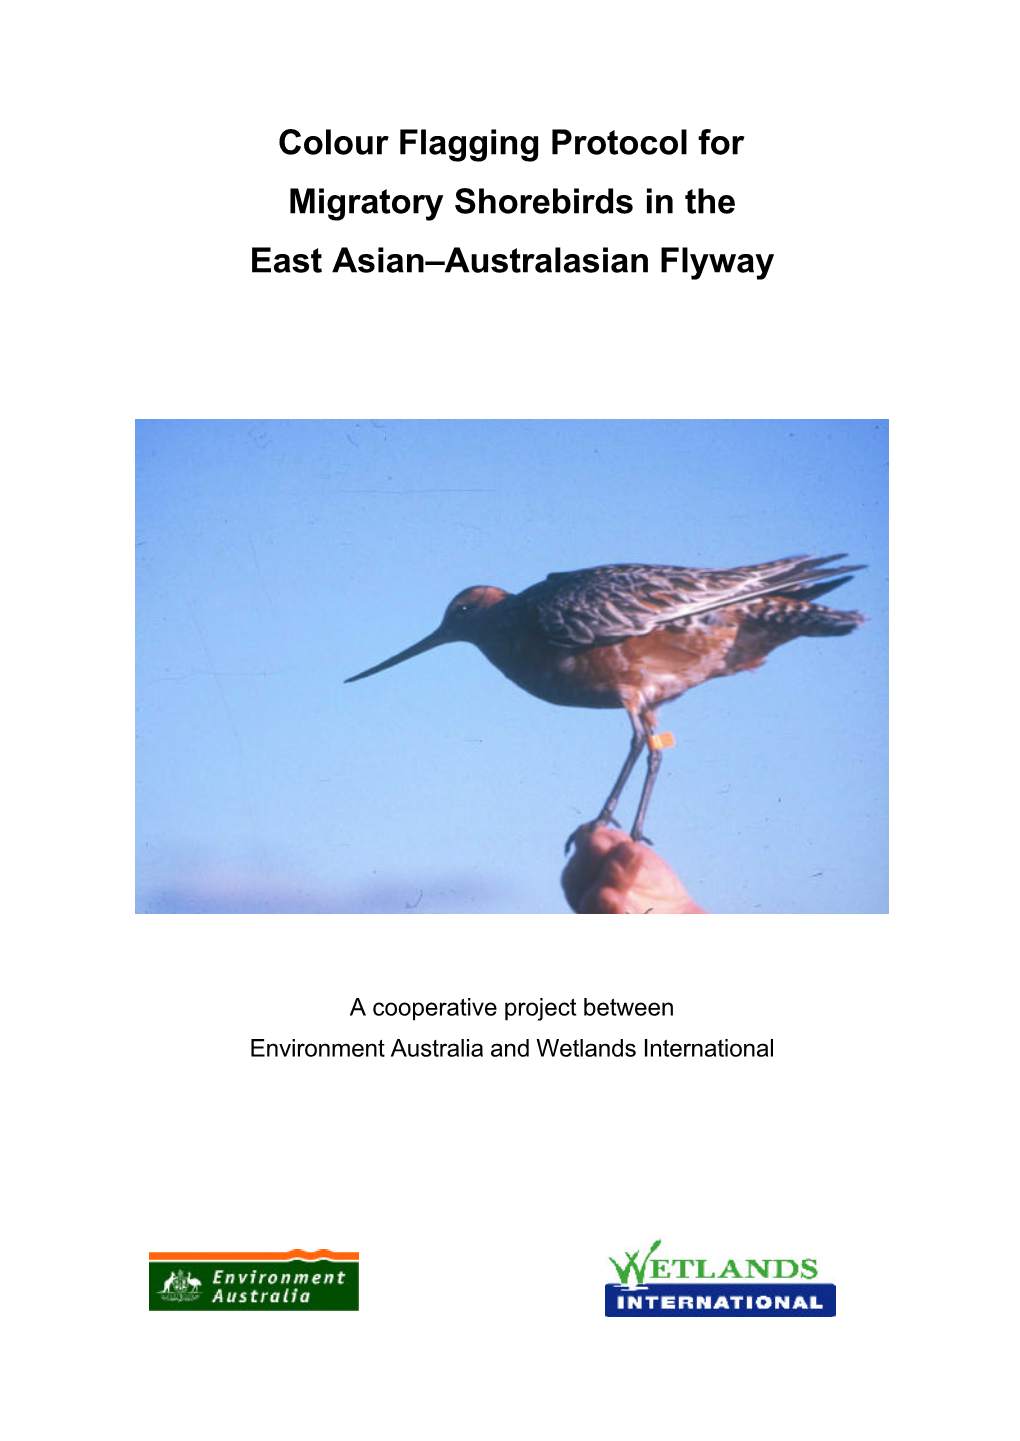 Colour Flagging Protocol for Migratory Shorebirds in the East Asian–Australasian Flyway